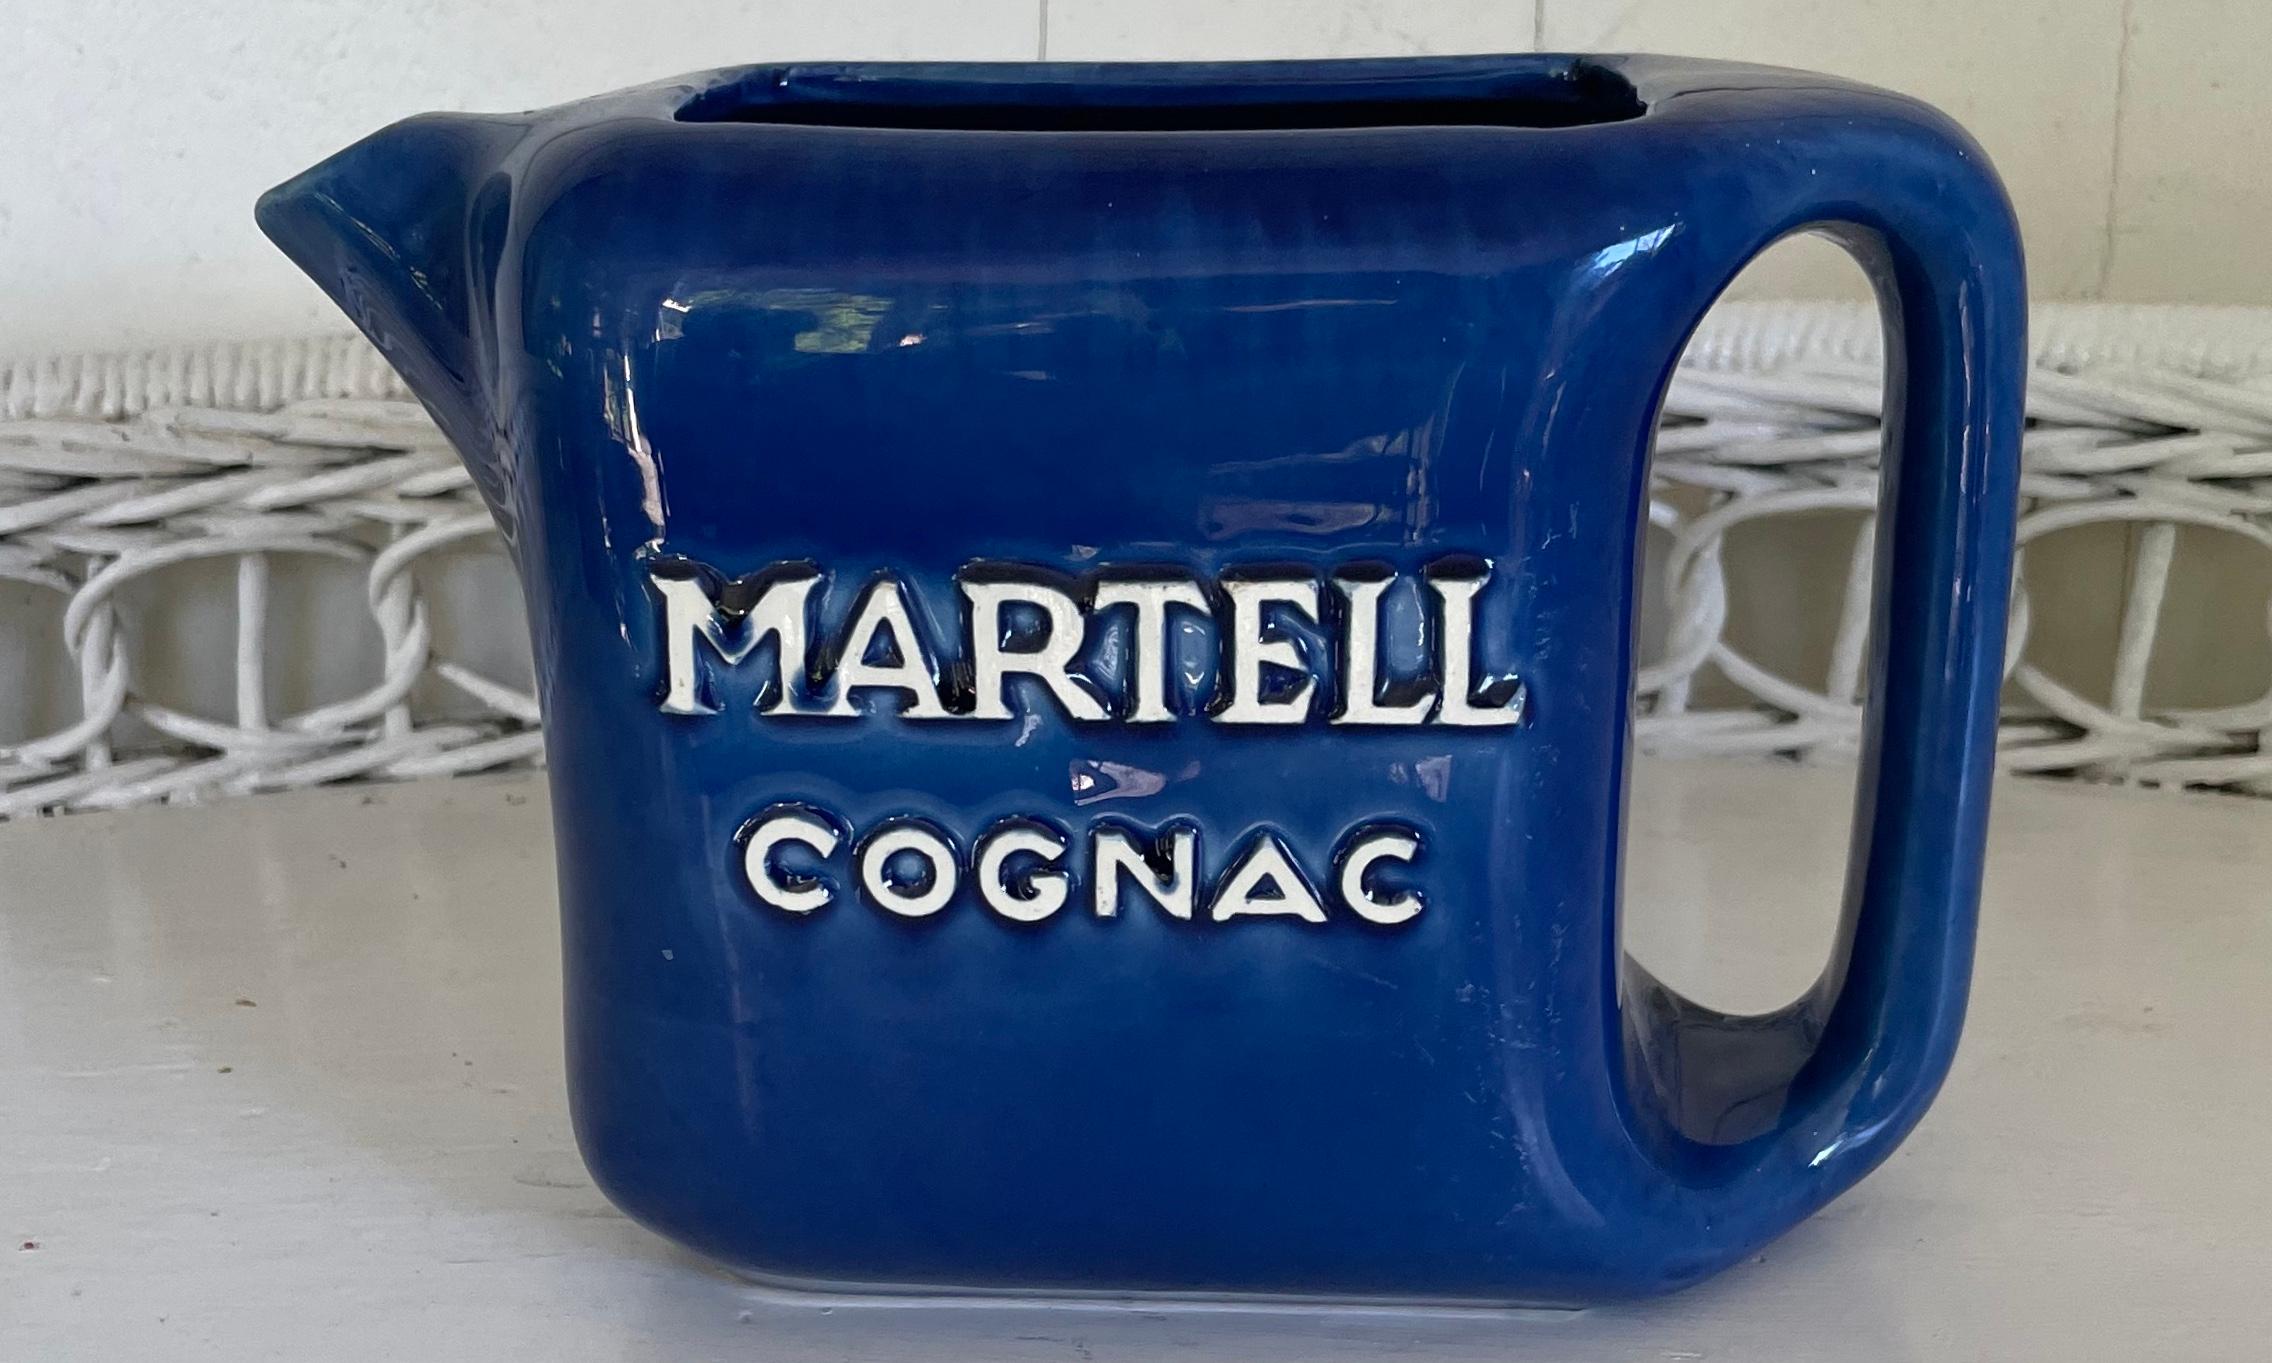 Martell Cognac blue pitcher. Vintage French blue glazed bar water pitcher with the Martell Cognac logo in white with markings for St. Clement factory. France, Mid-20th century. 
Dimensions: 8” W x 3.75